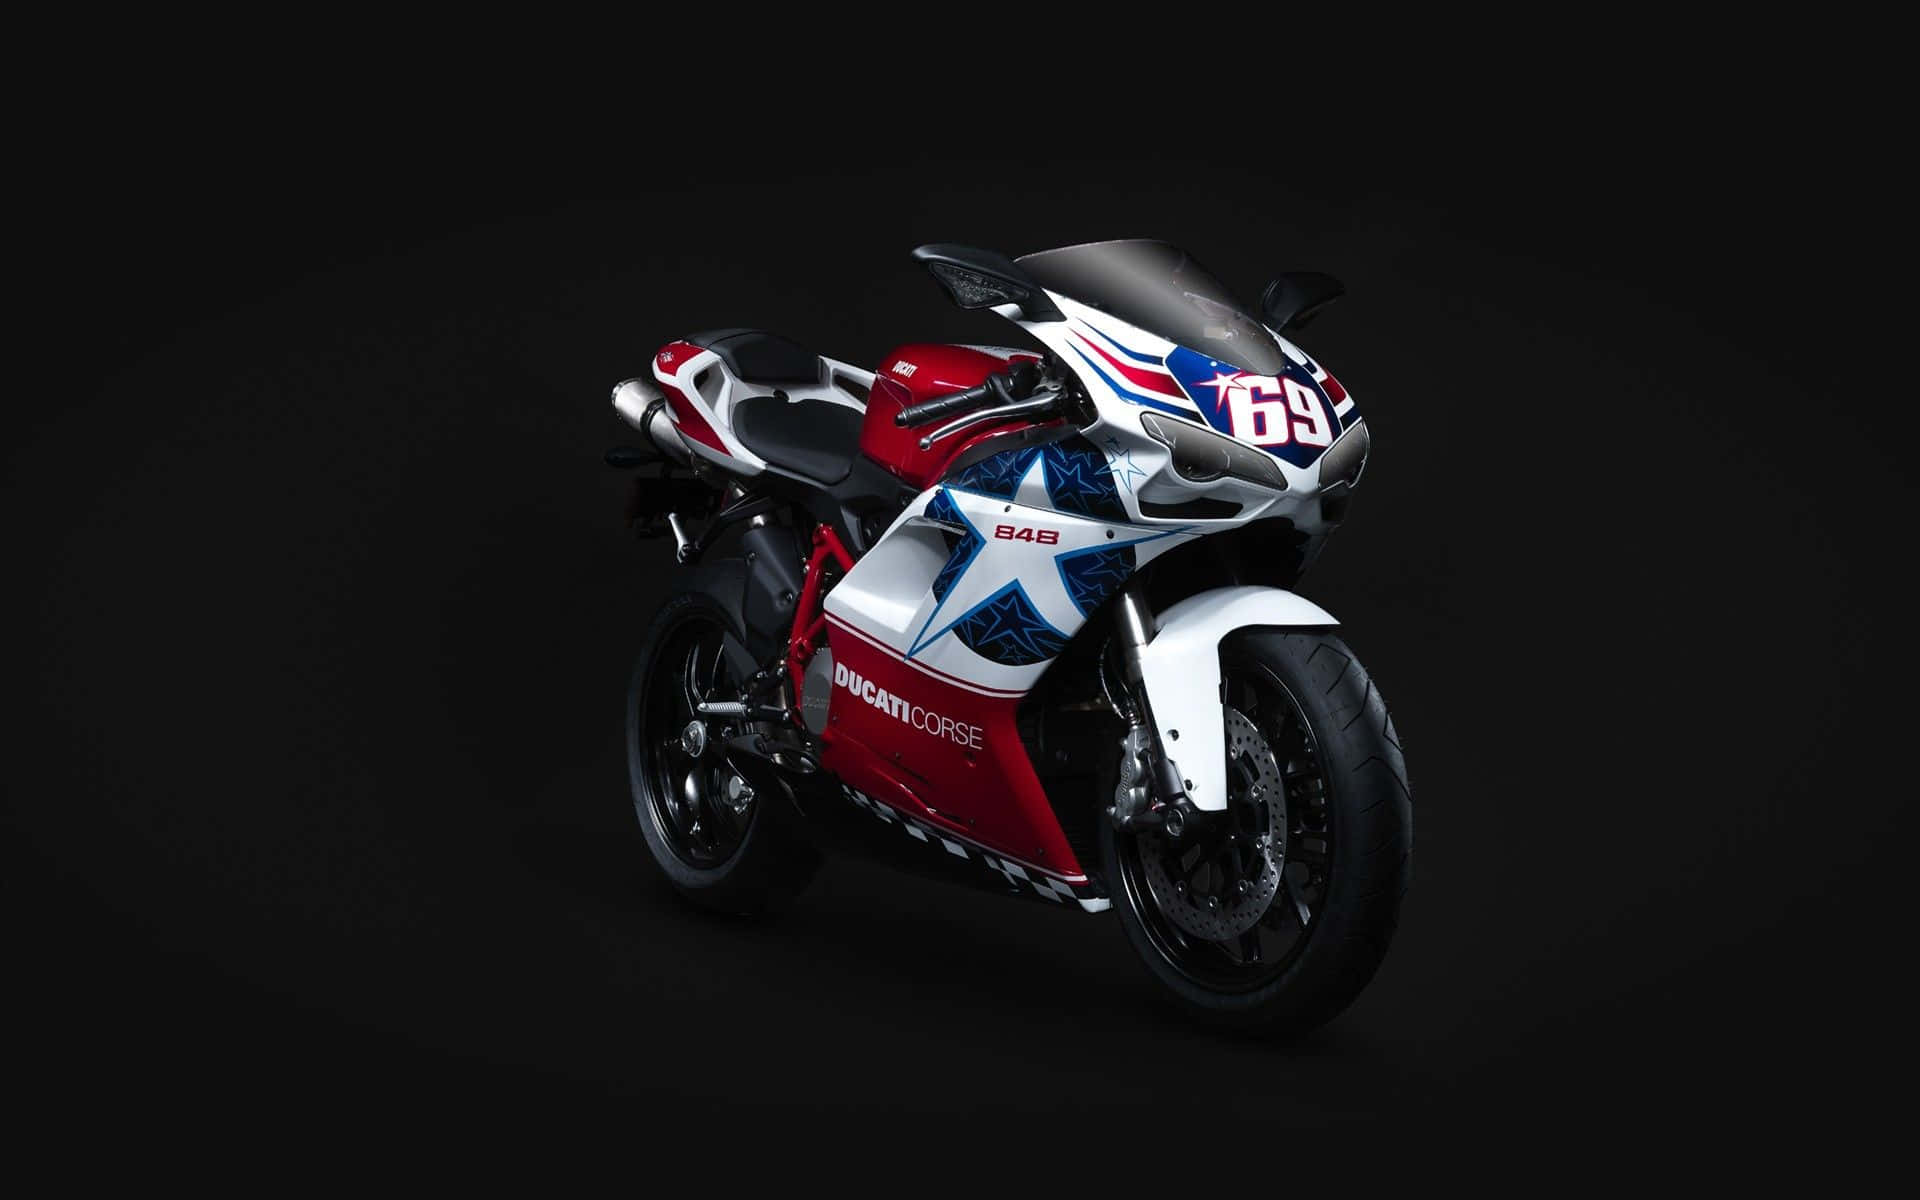 A Motorcycle With A Red, White And Blue Design